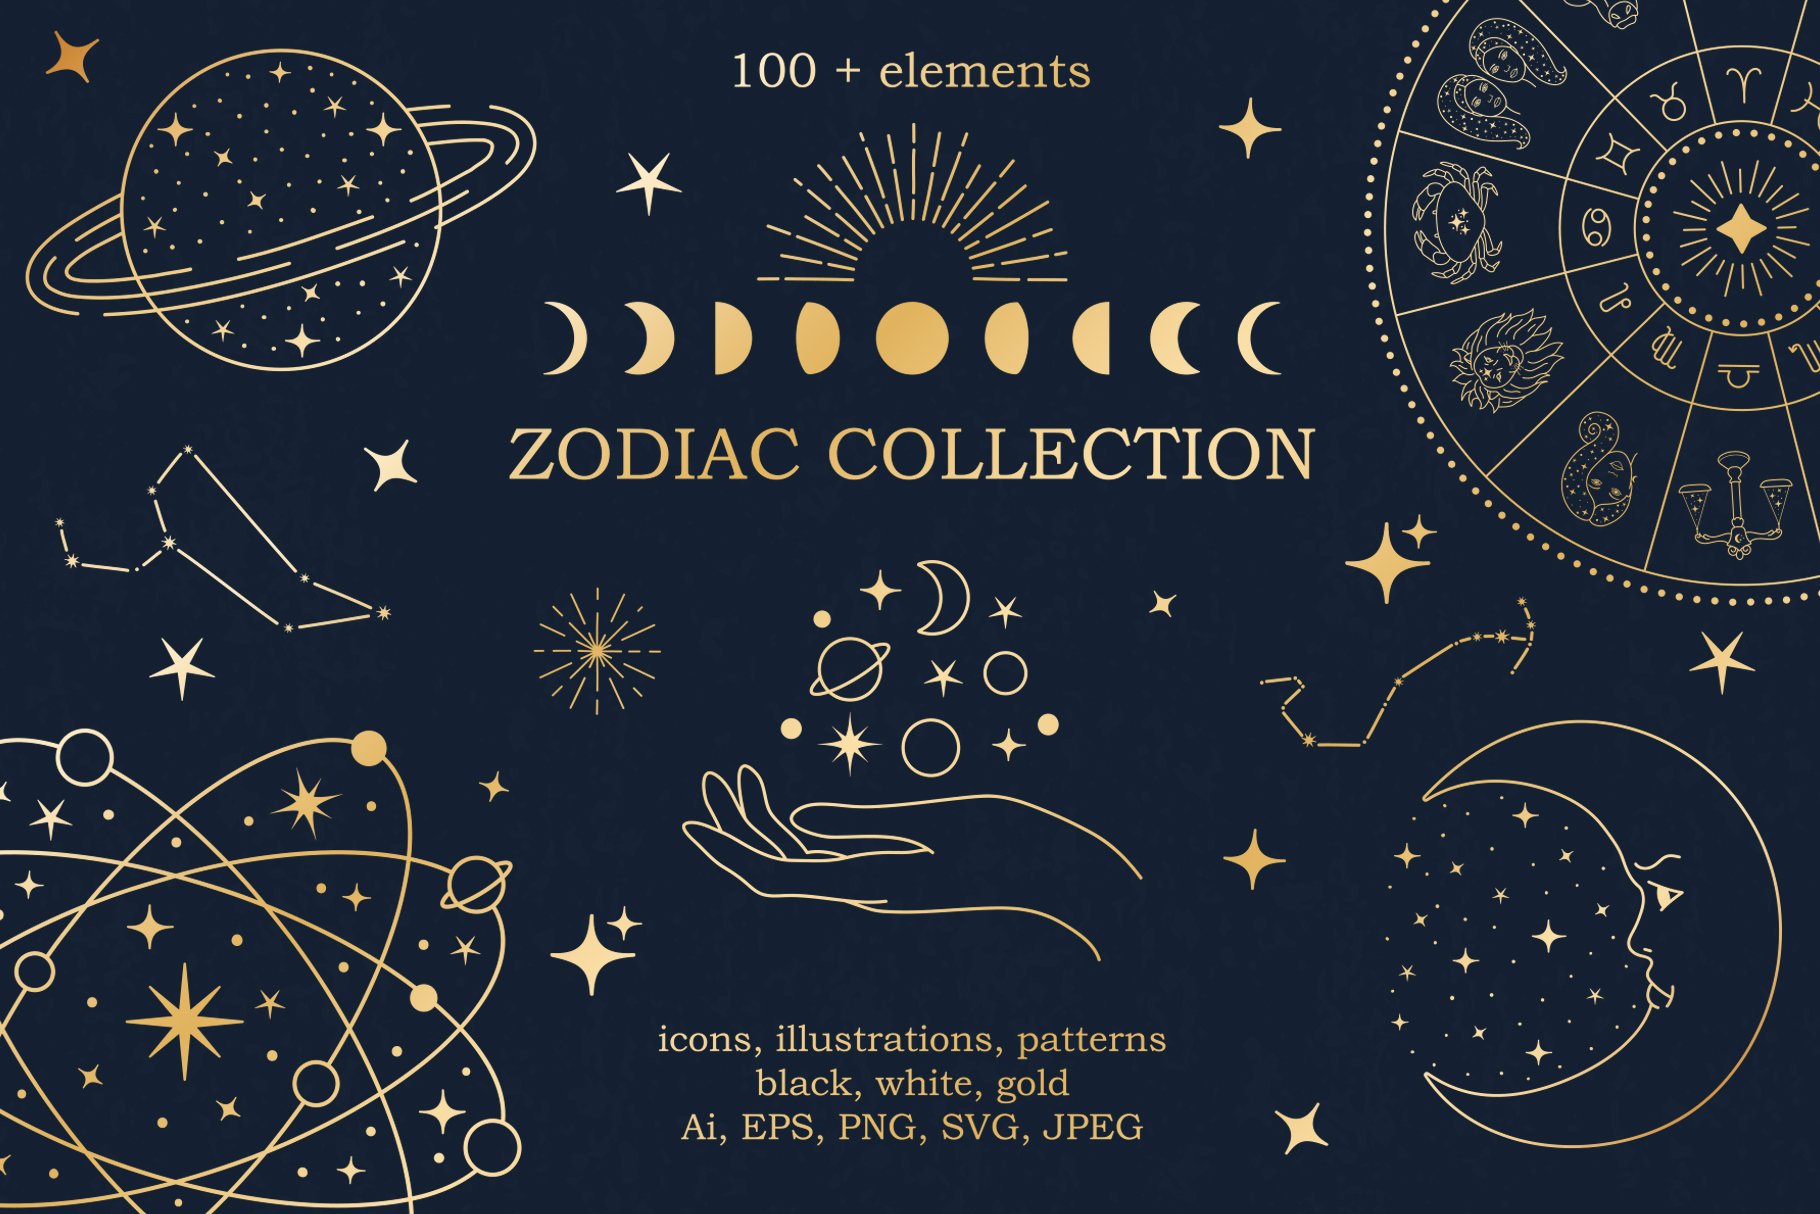 Zodiac signs and constellations cover image.